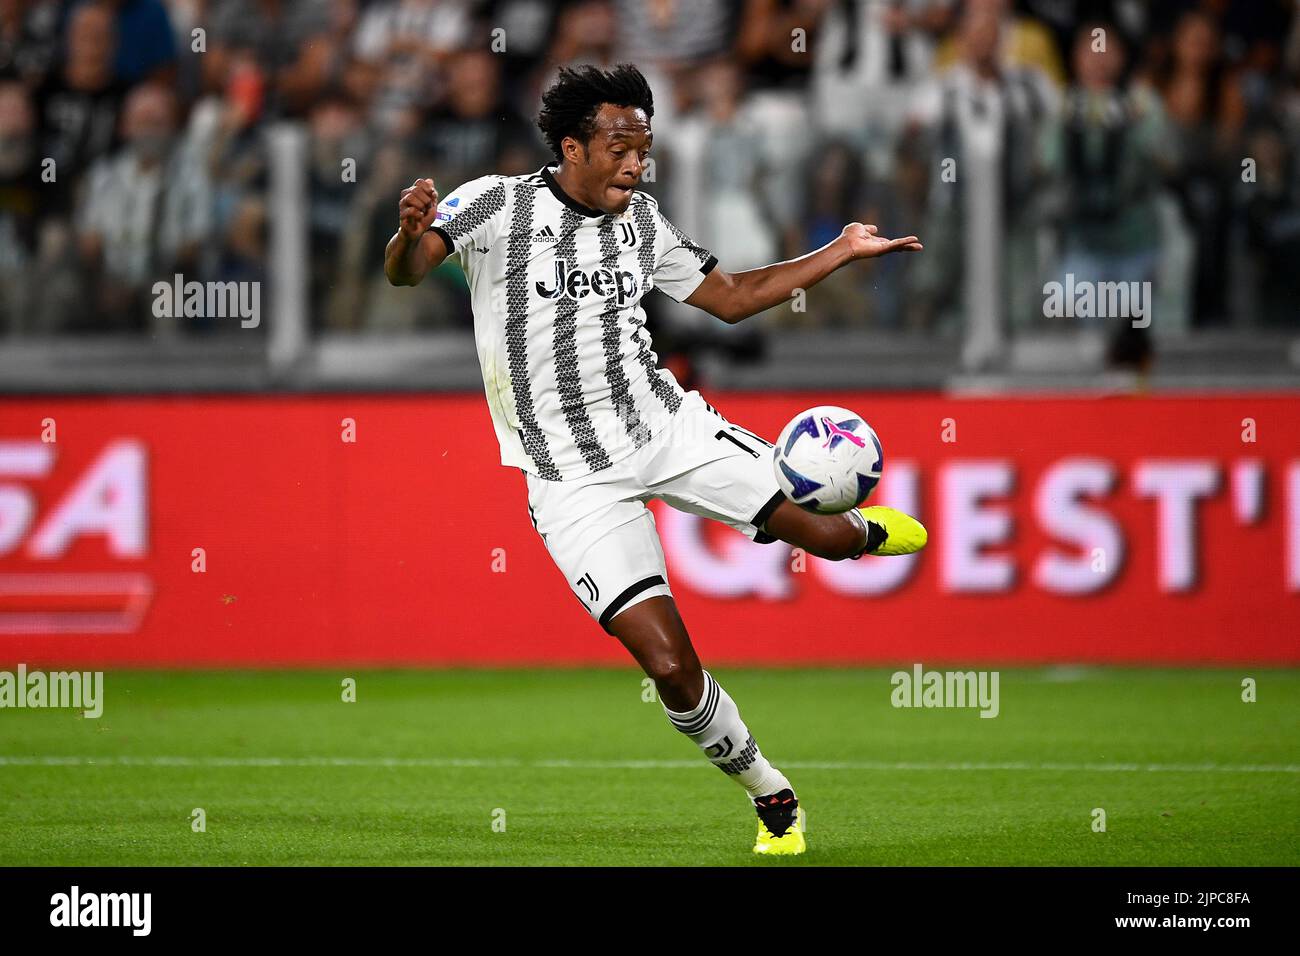 Turin, Italy. 15 August 2022. Juan Cuadrado of Juventus FC kicks the ball during the Serie A football match between Juventus FC and US Sassuolo. Credit: Nicolò Campo/Alamy Live News Stock Photo